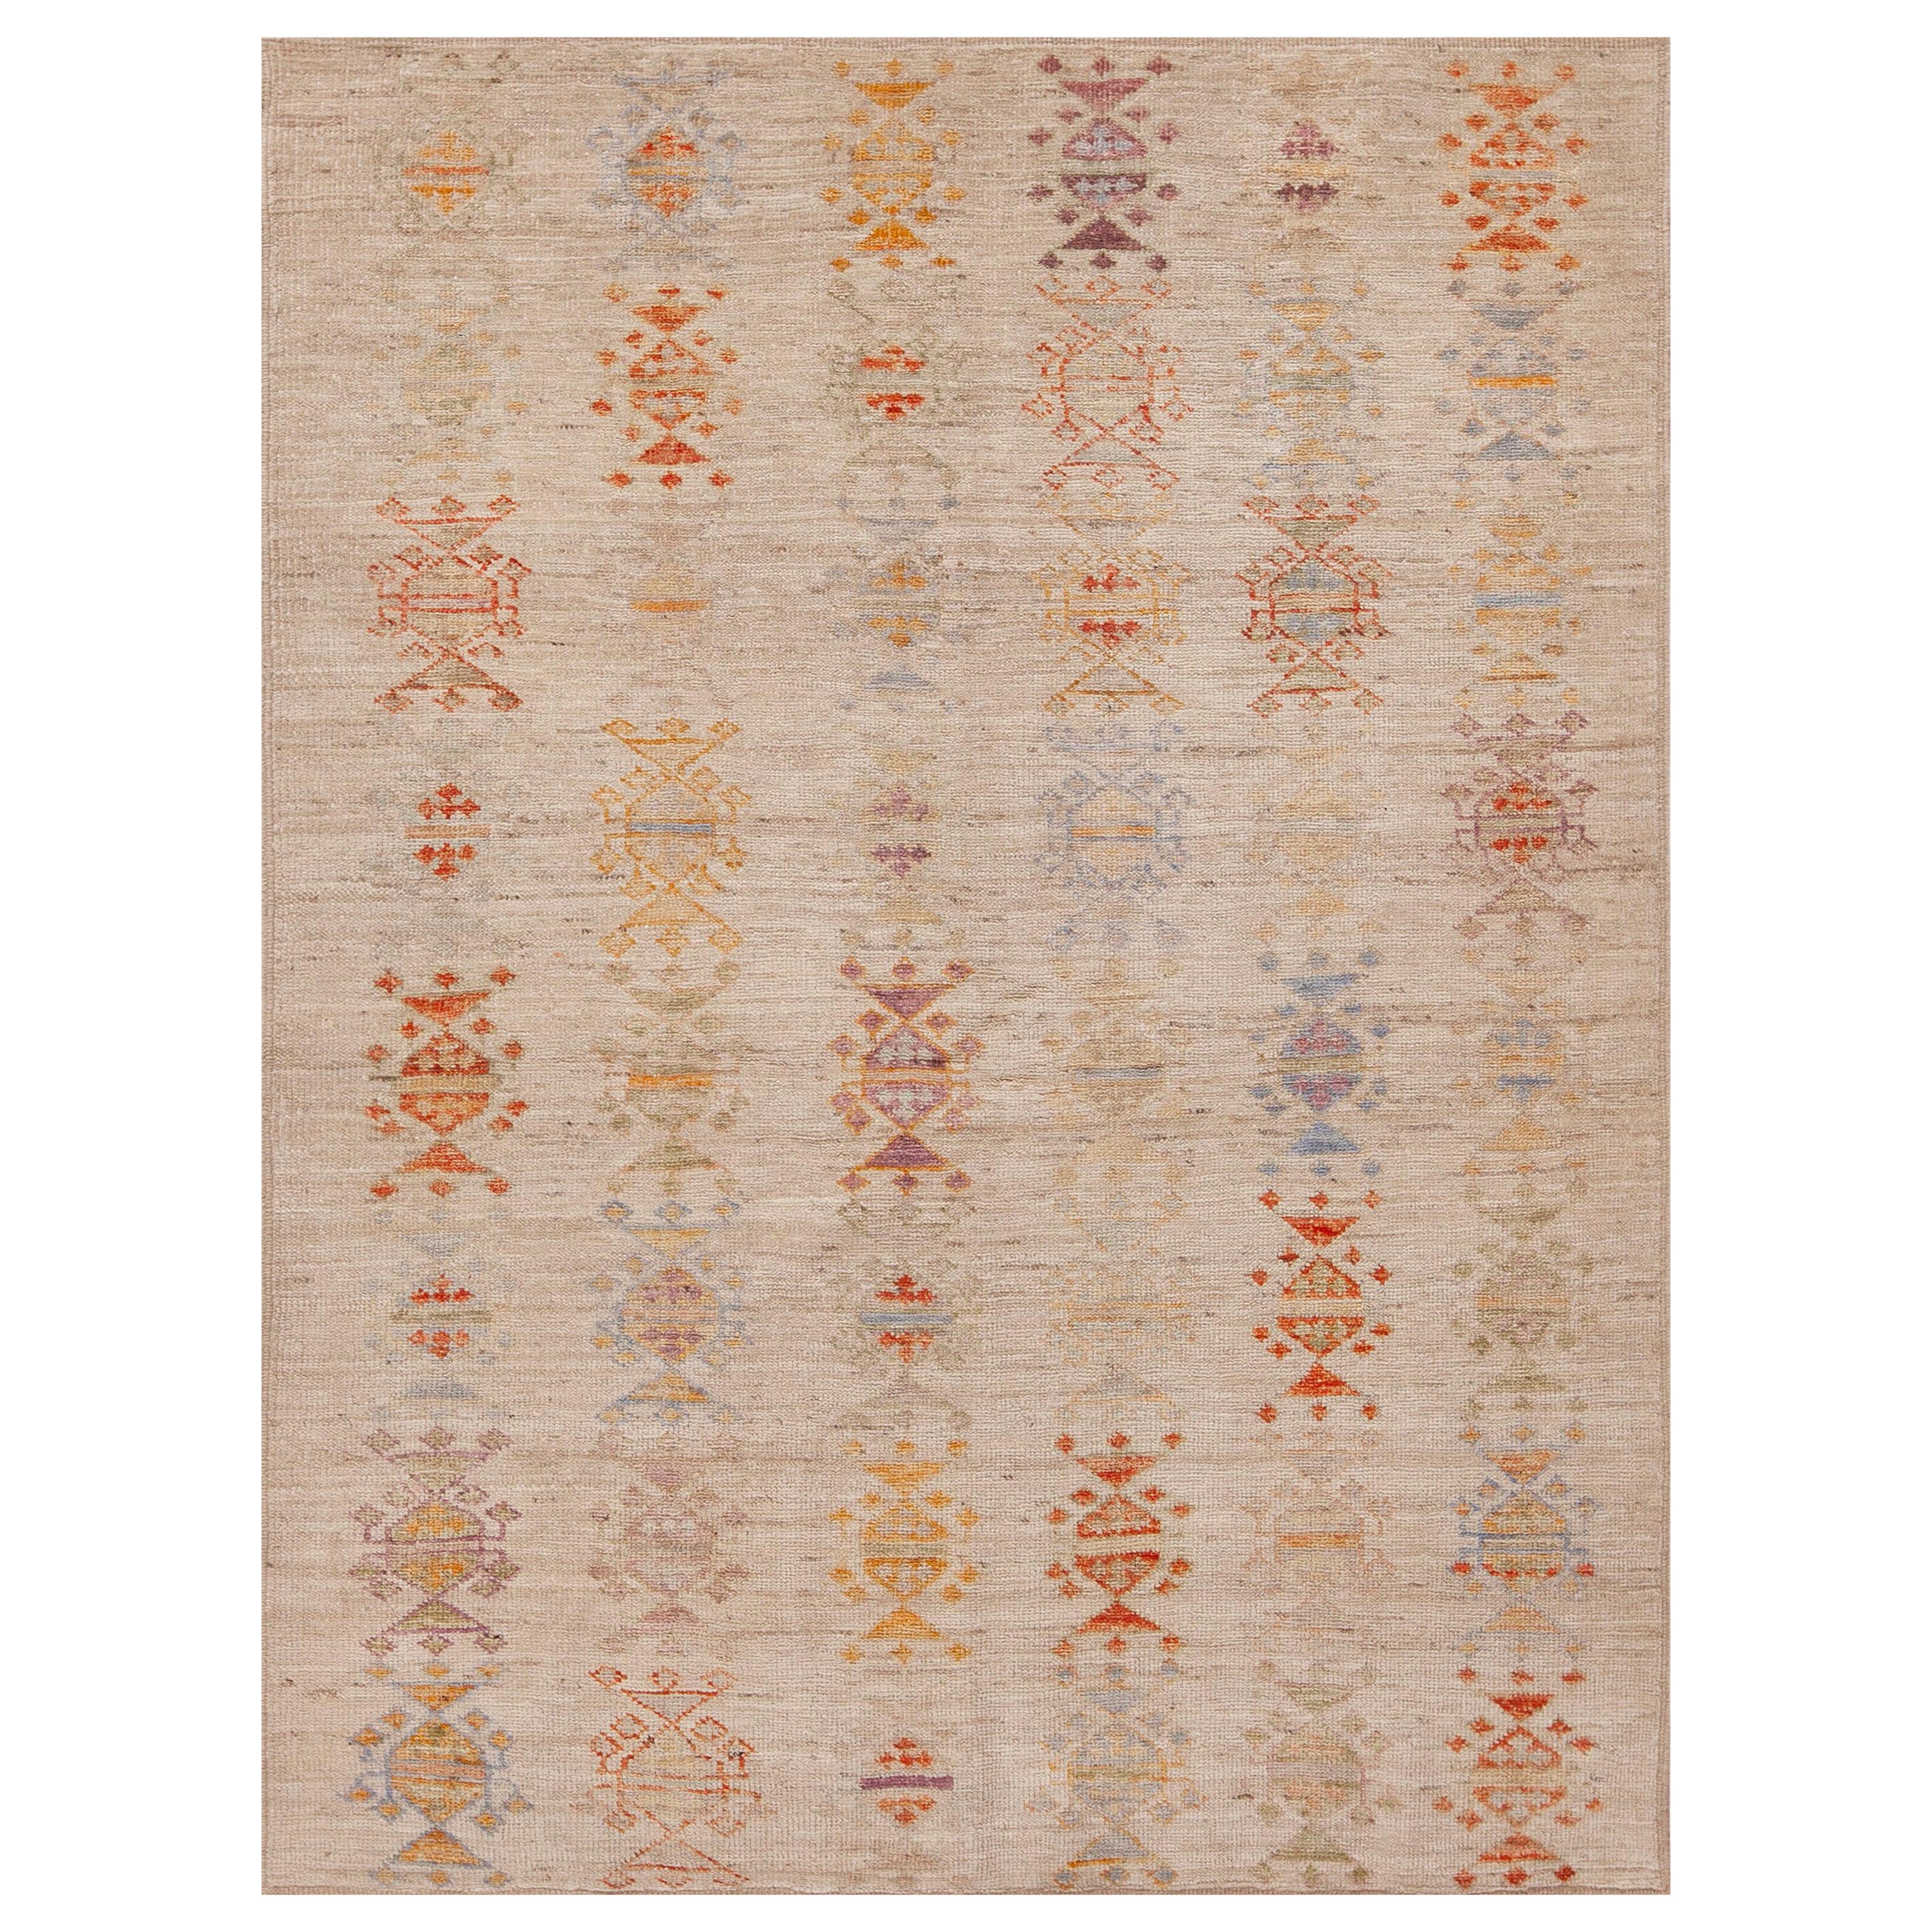 Nazmiyal Collection Small Tribal Modern Contemporary Rustic Rug 4'5" x 5'11"